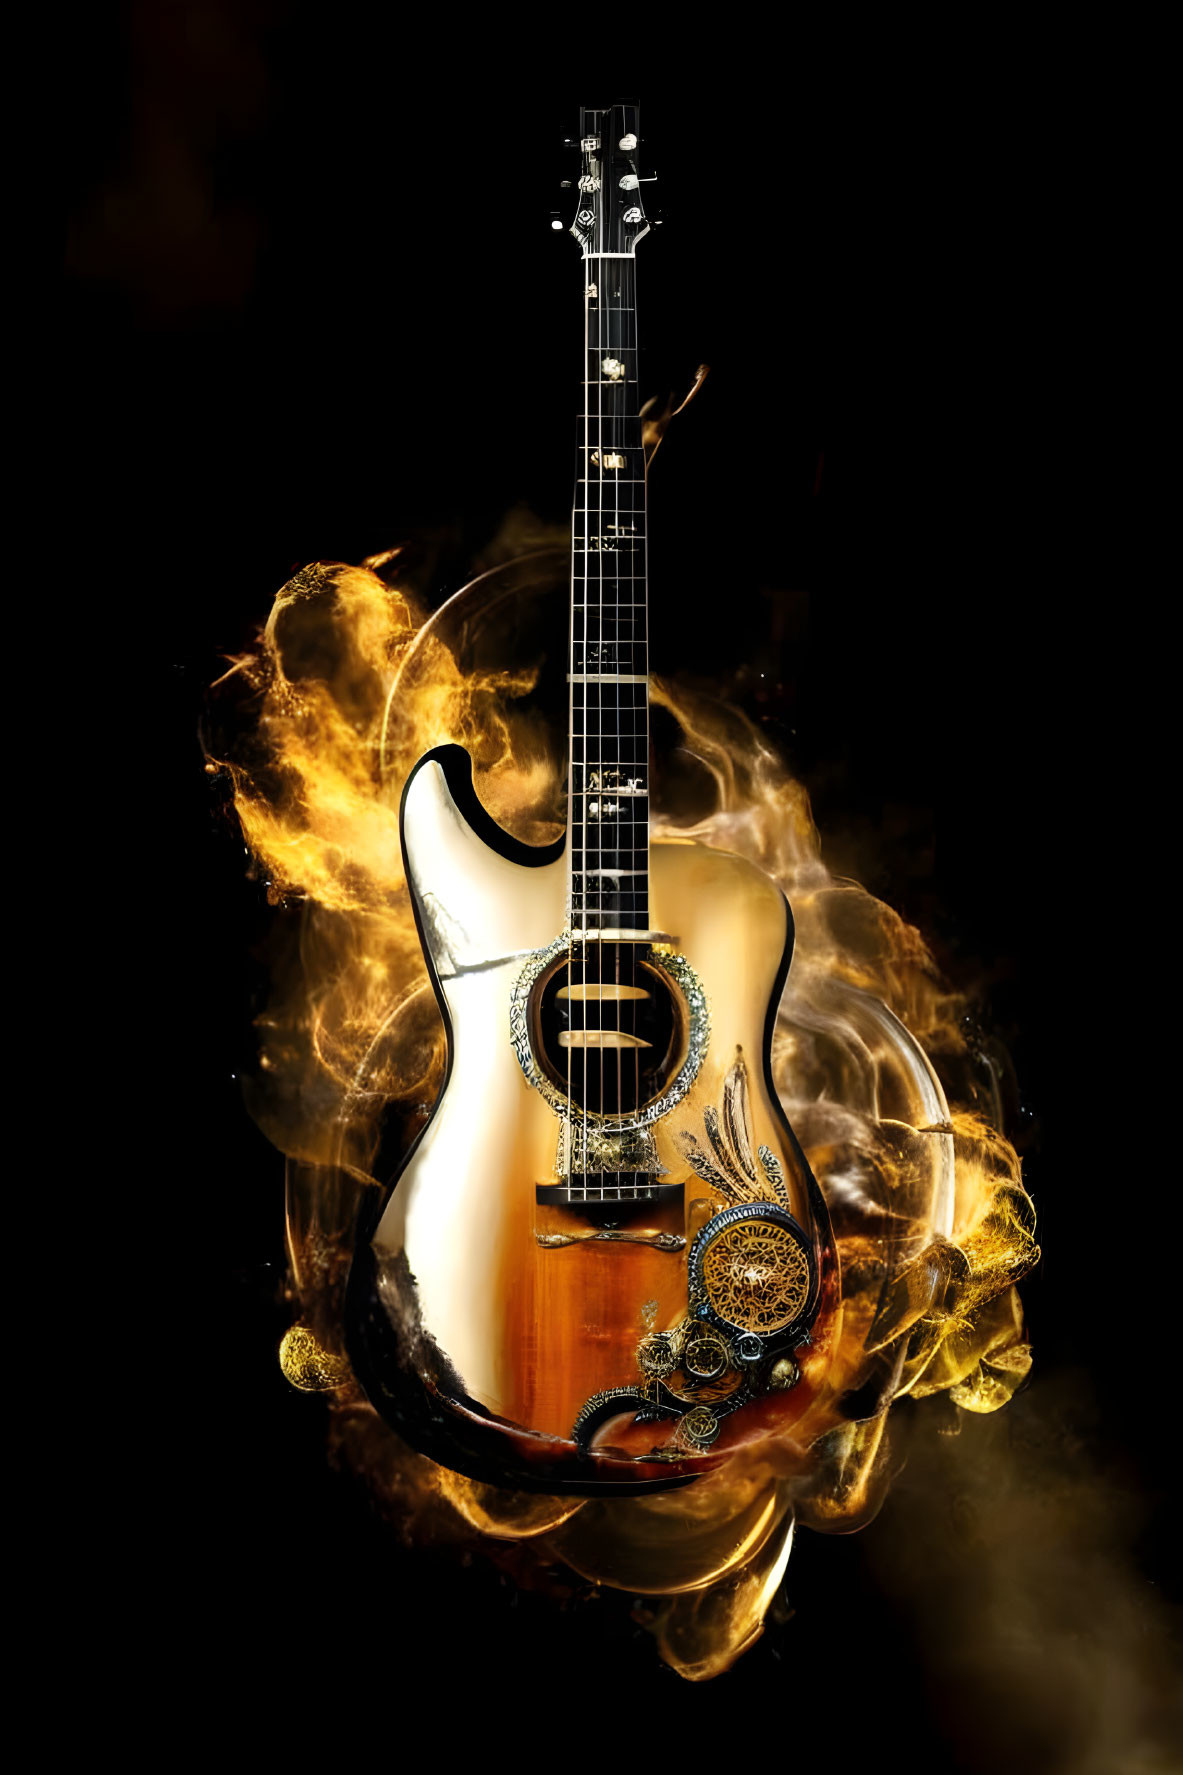 Flaming Acoustic Guitar on Black Background